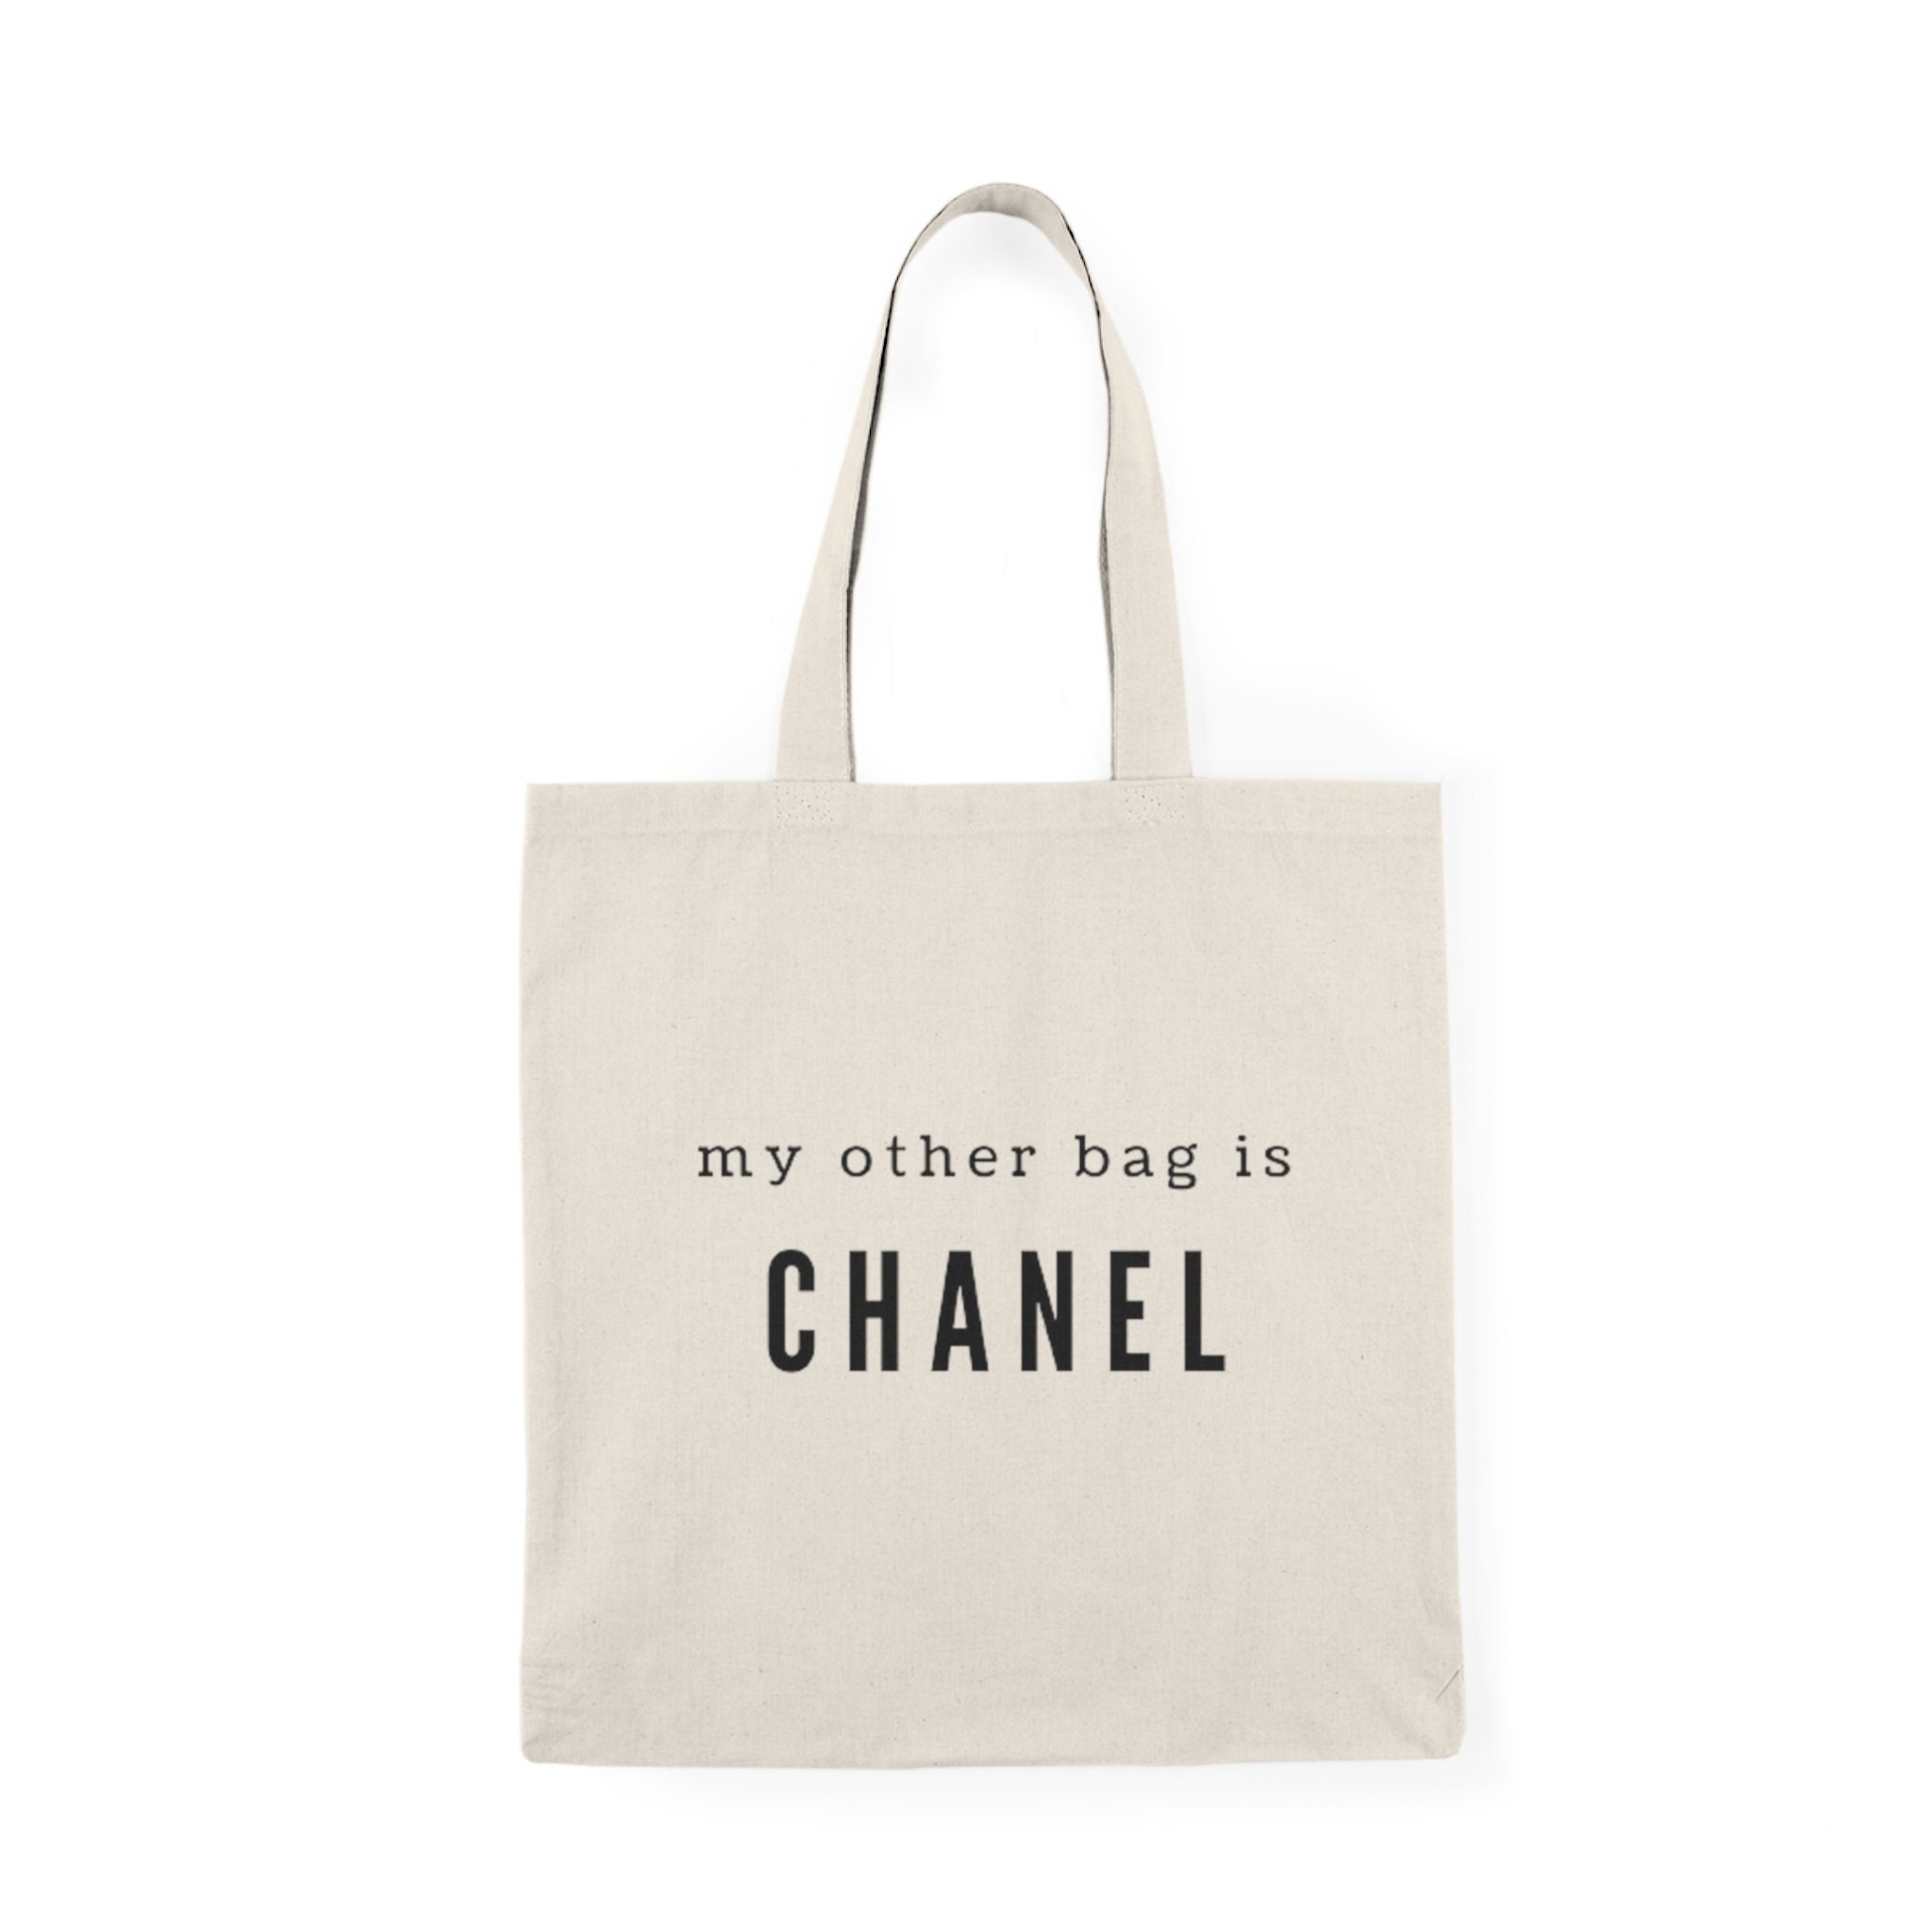 HunniBunni Designs - The 'My Other Bag is Chanel' juco shopping